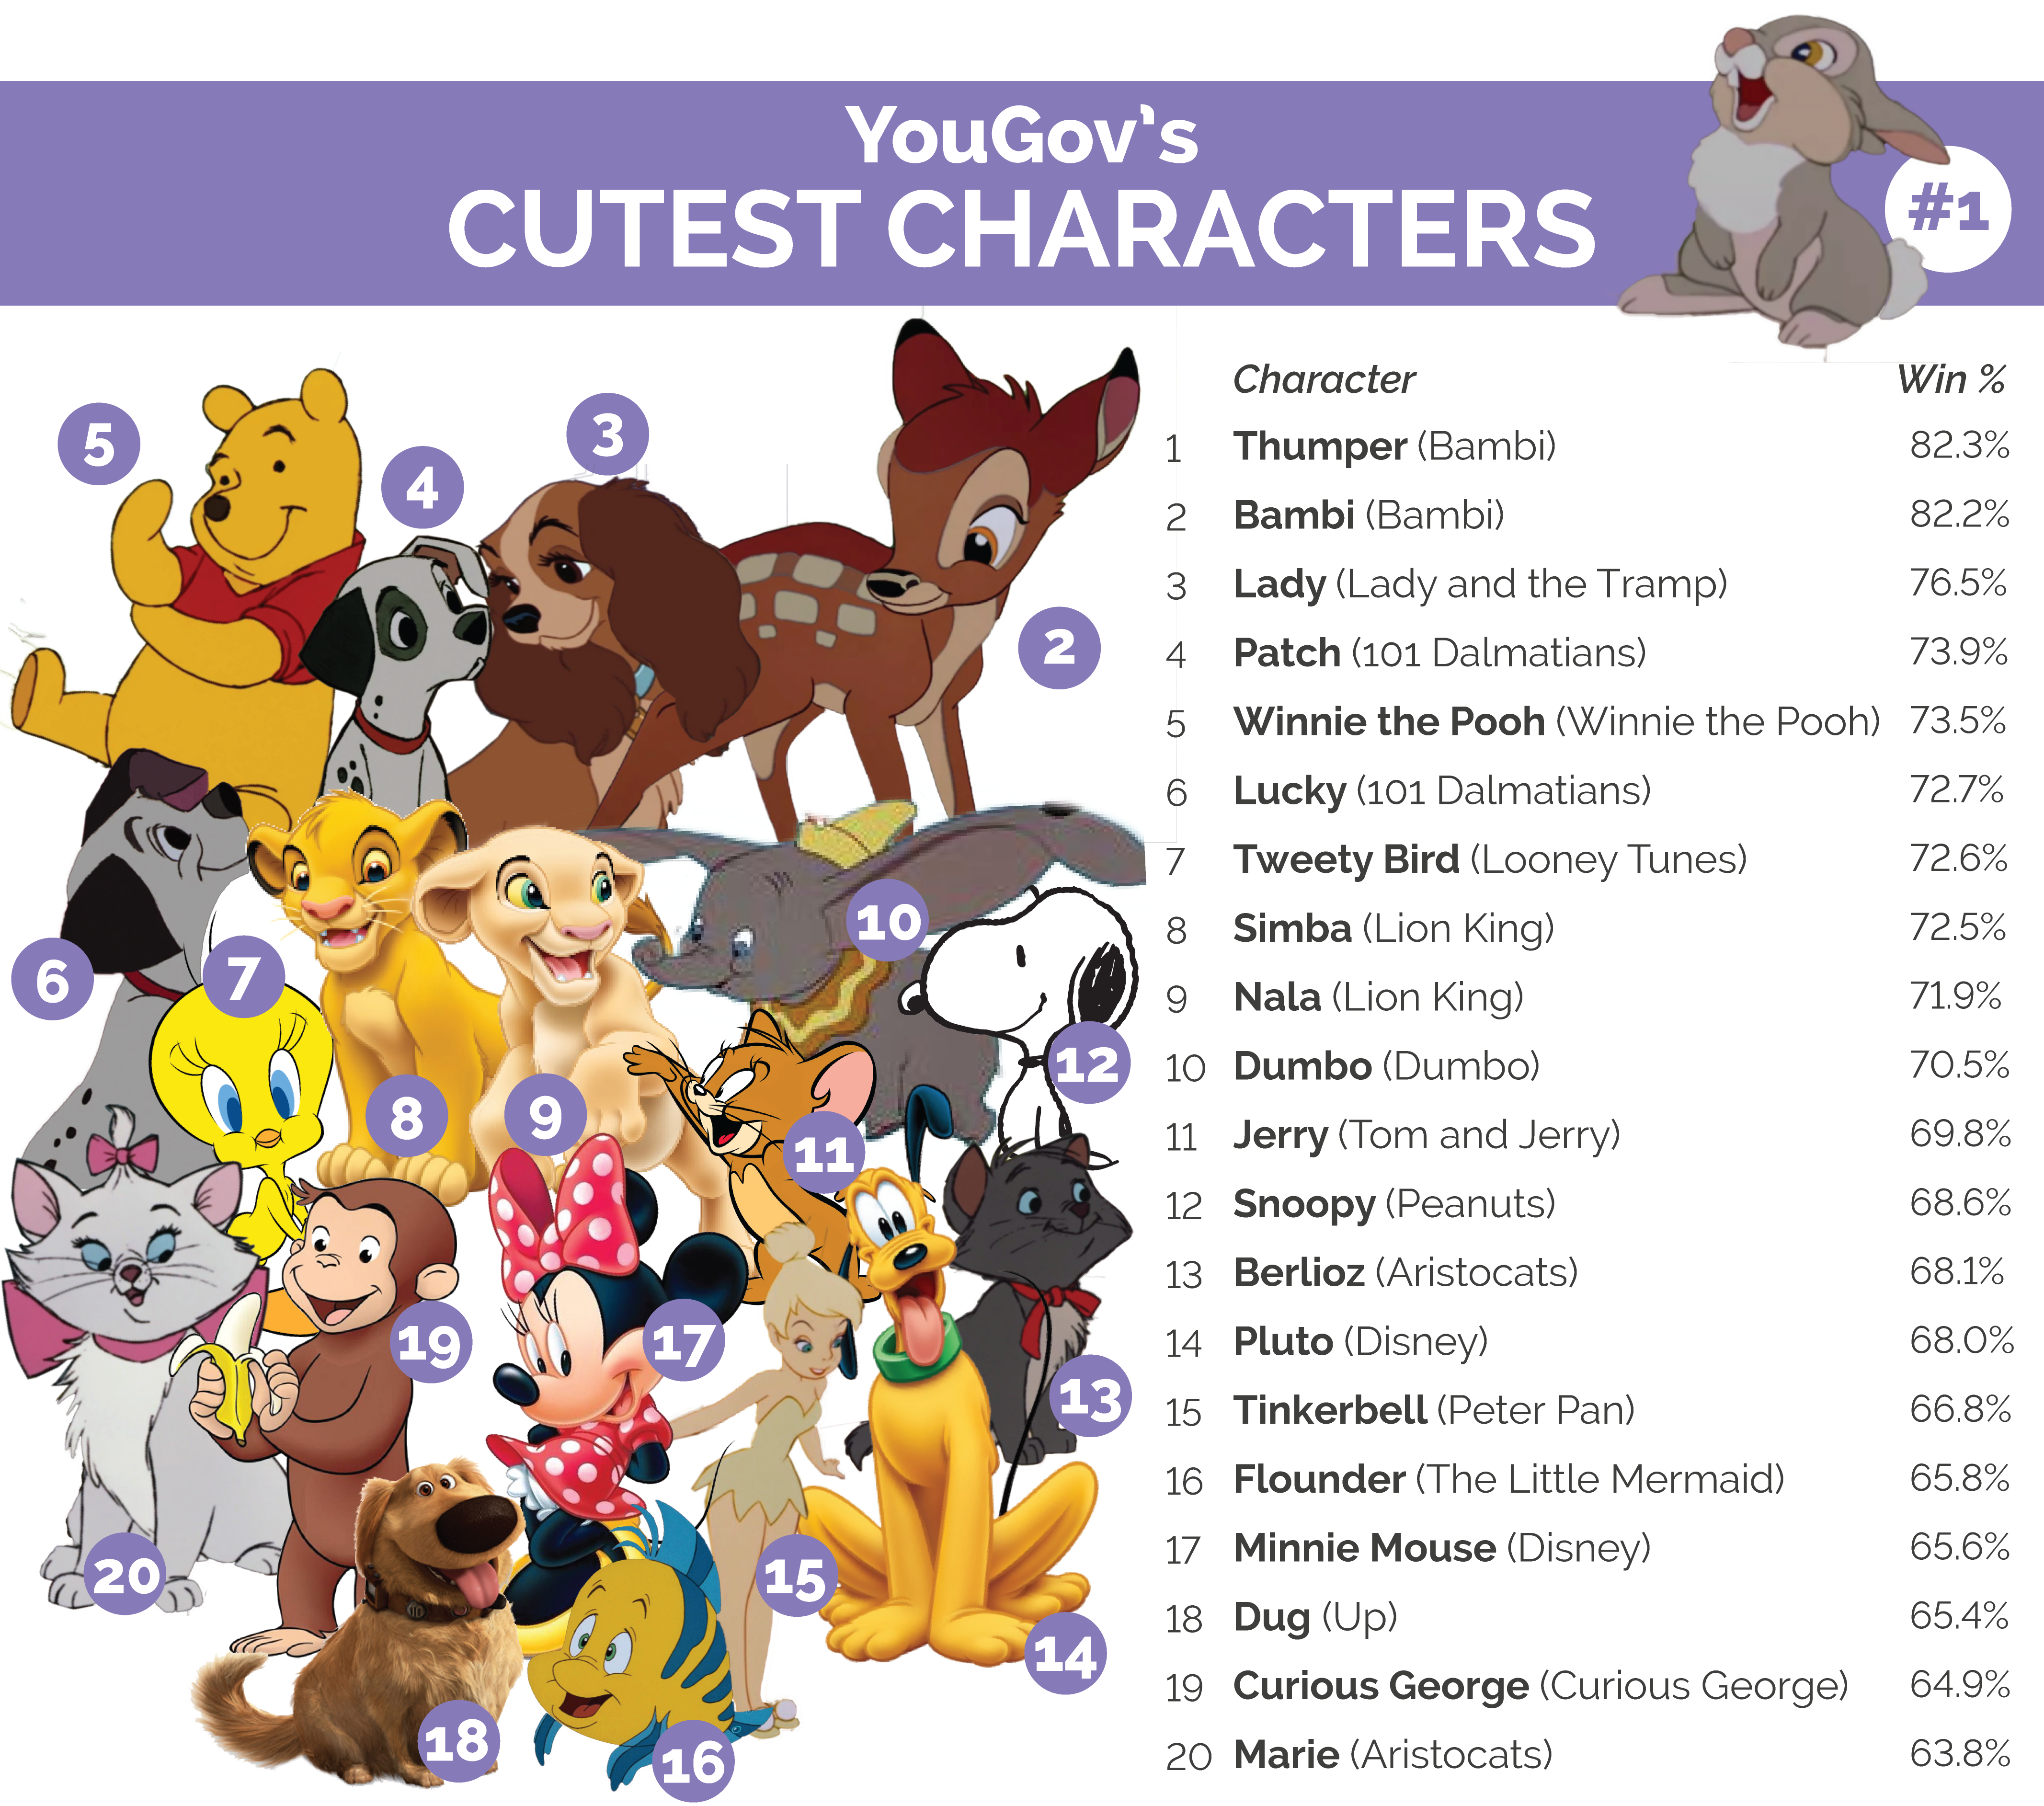 Who is America's Cutest Character?